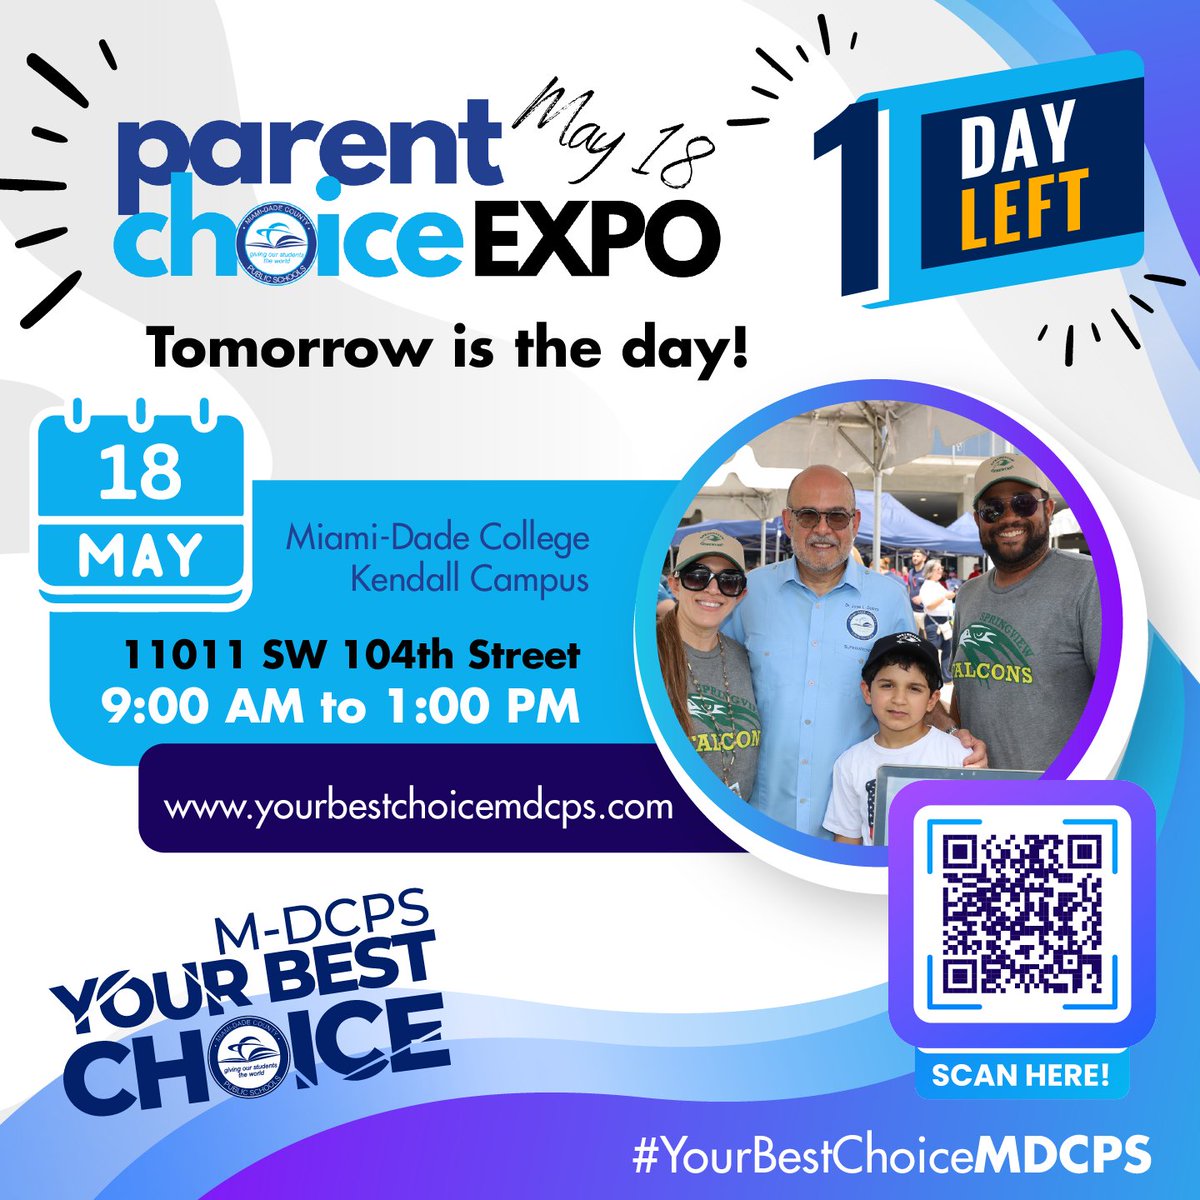 Tomorrow is the day! Don't miss the Parent Choice Expo at @MDCollege Kendall Campus and learn why @MDCPS is your best choice for outstanding education, amazing programs, top resources & unique support. For more info, visit: yourbestchoicemdcps.com #YourBestChoiceMDCPS